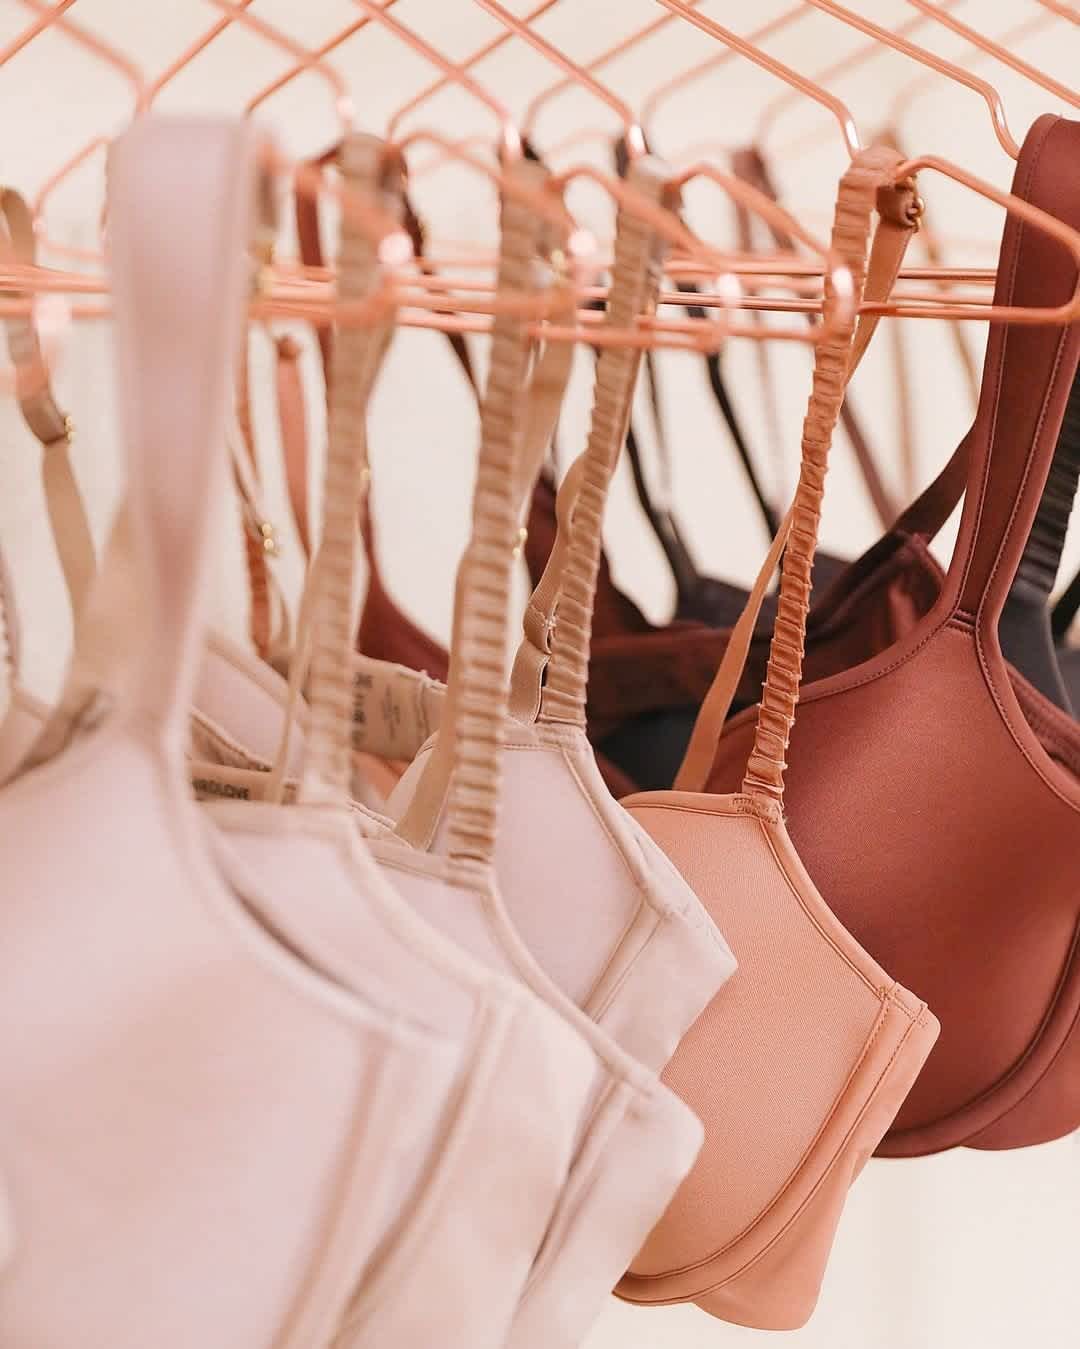 Hands Down, These Are The Best Bras For Women With Uneven Boobs